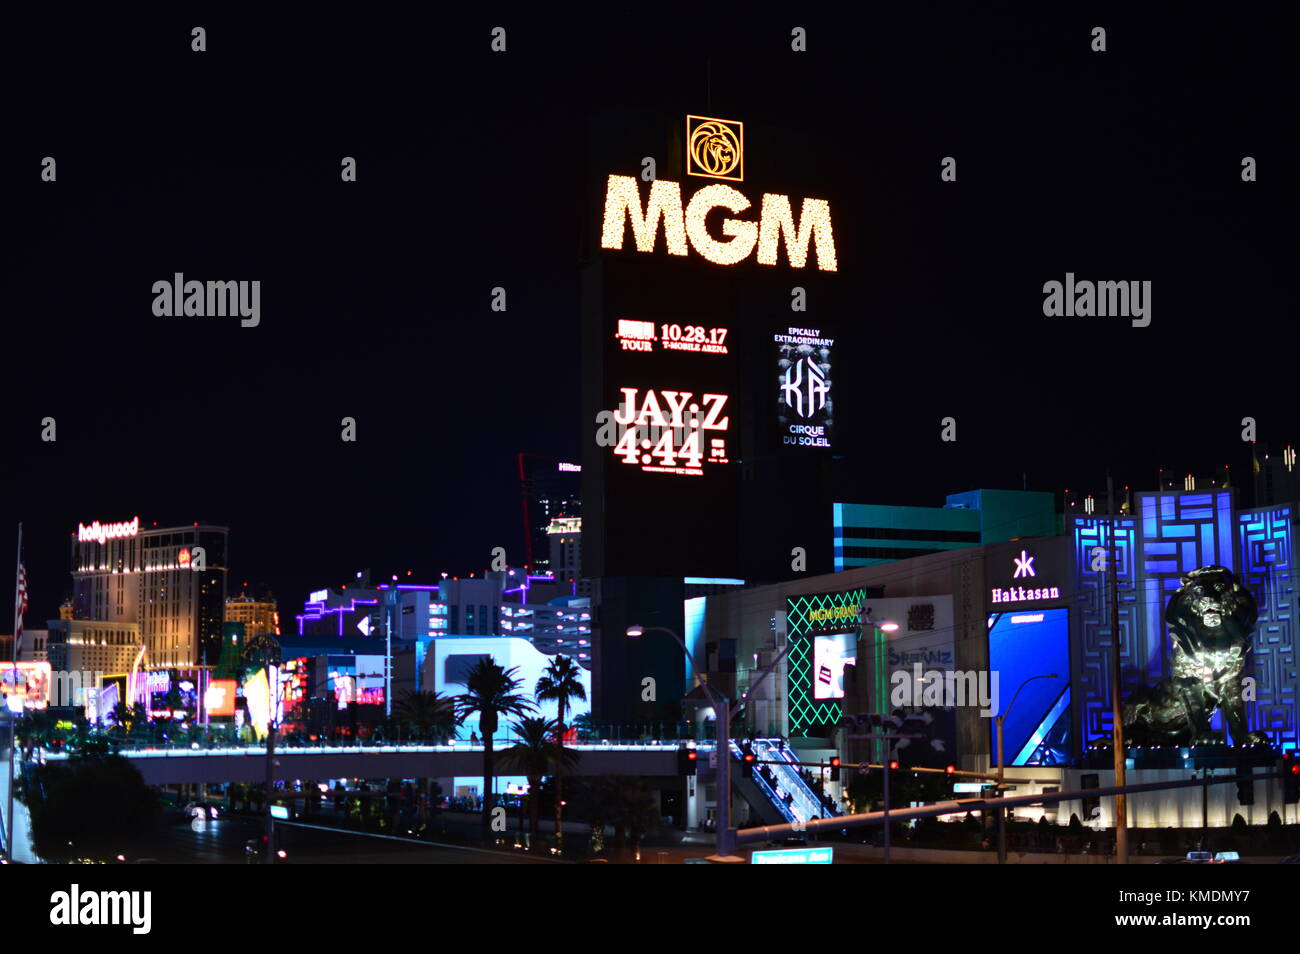 New York New York hotel, casino with fake statue of liberty. Big casino's on the world famous Las Vegas Strip, Nevada, United States of America. Stock Photo